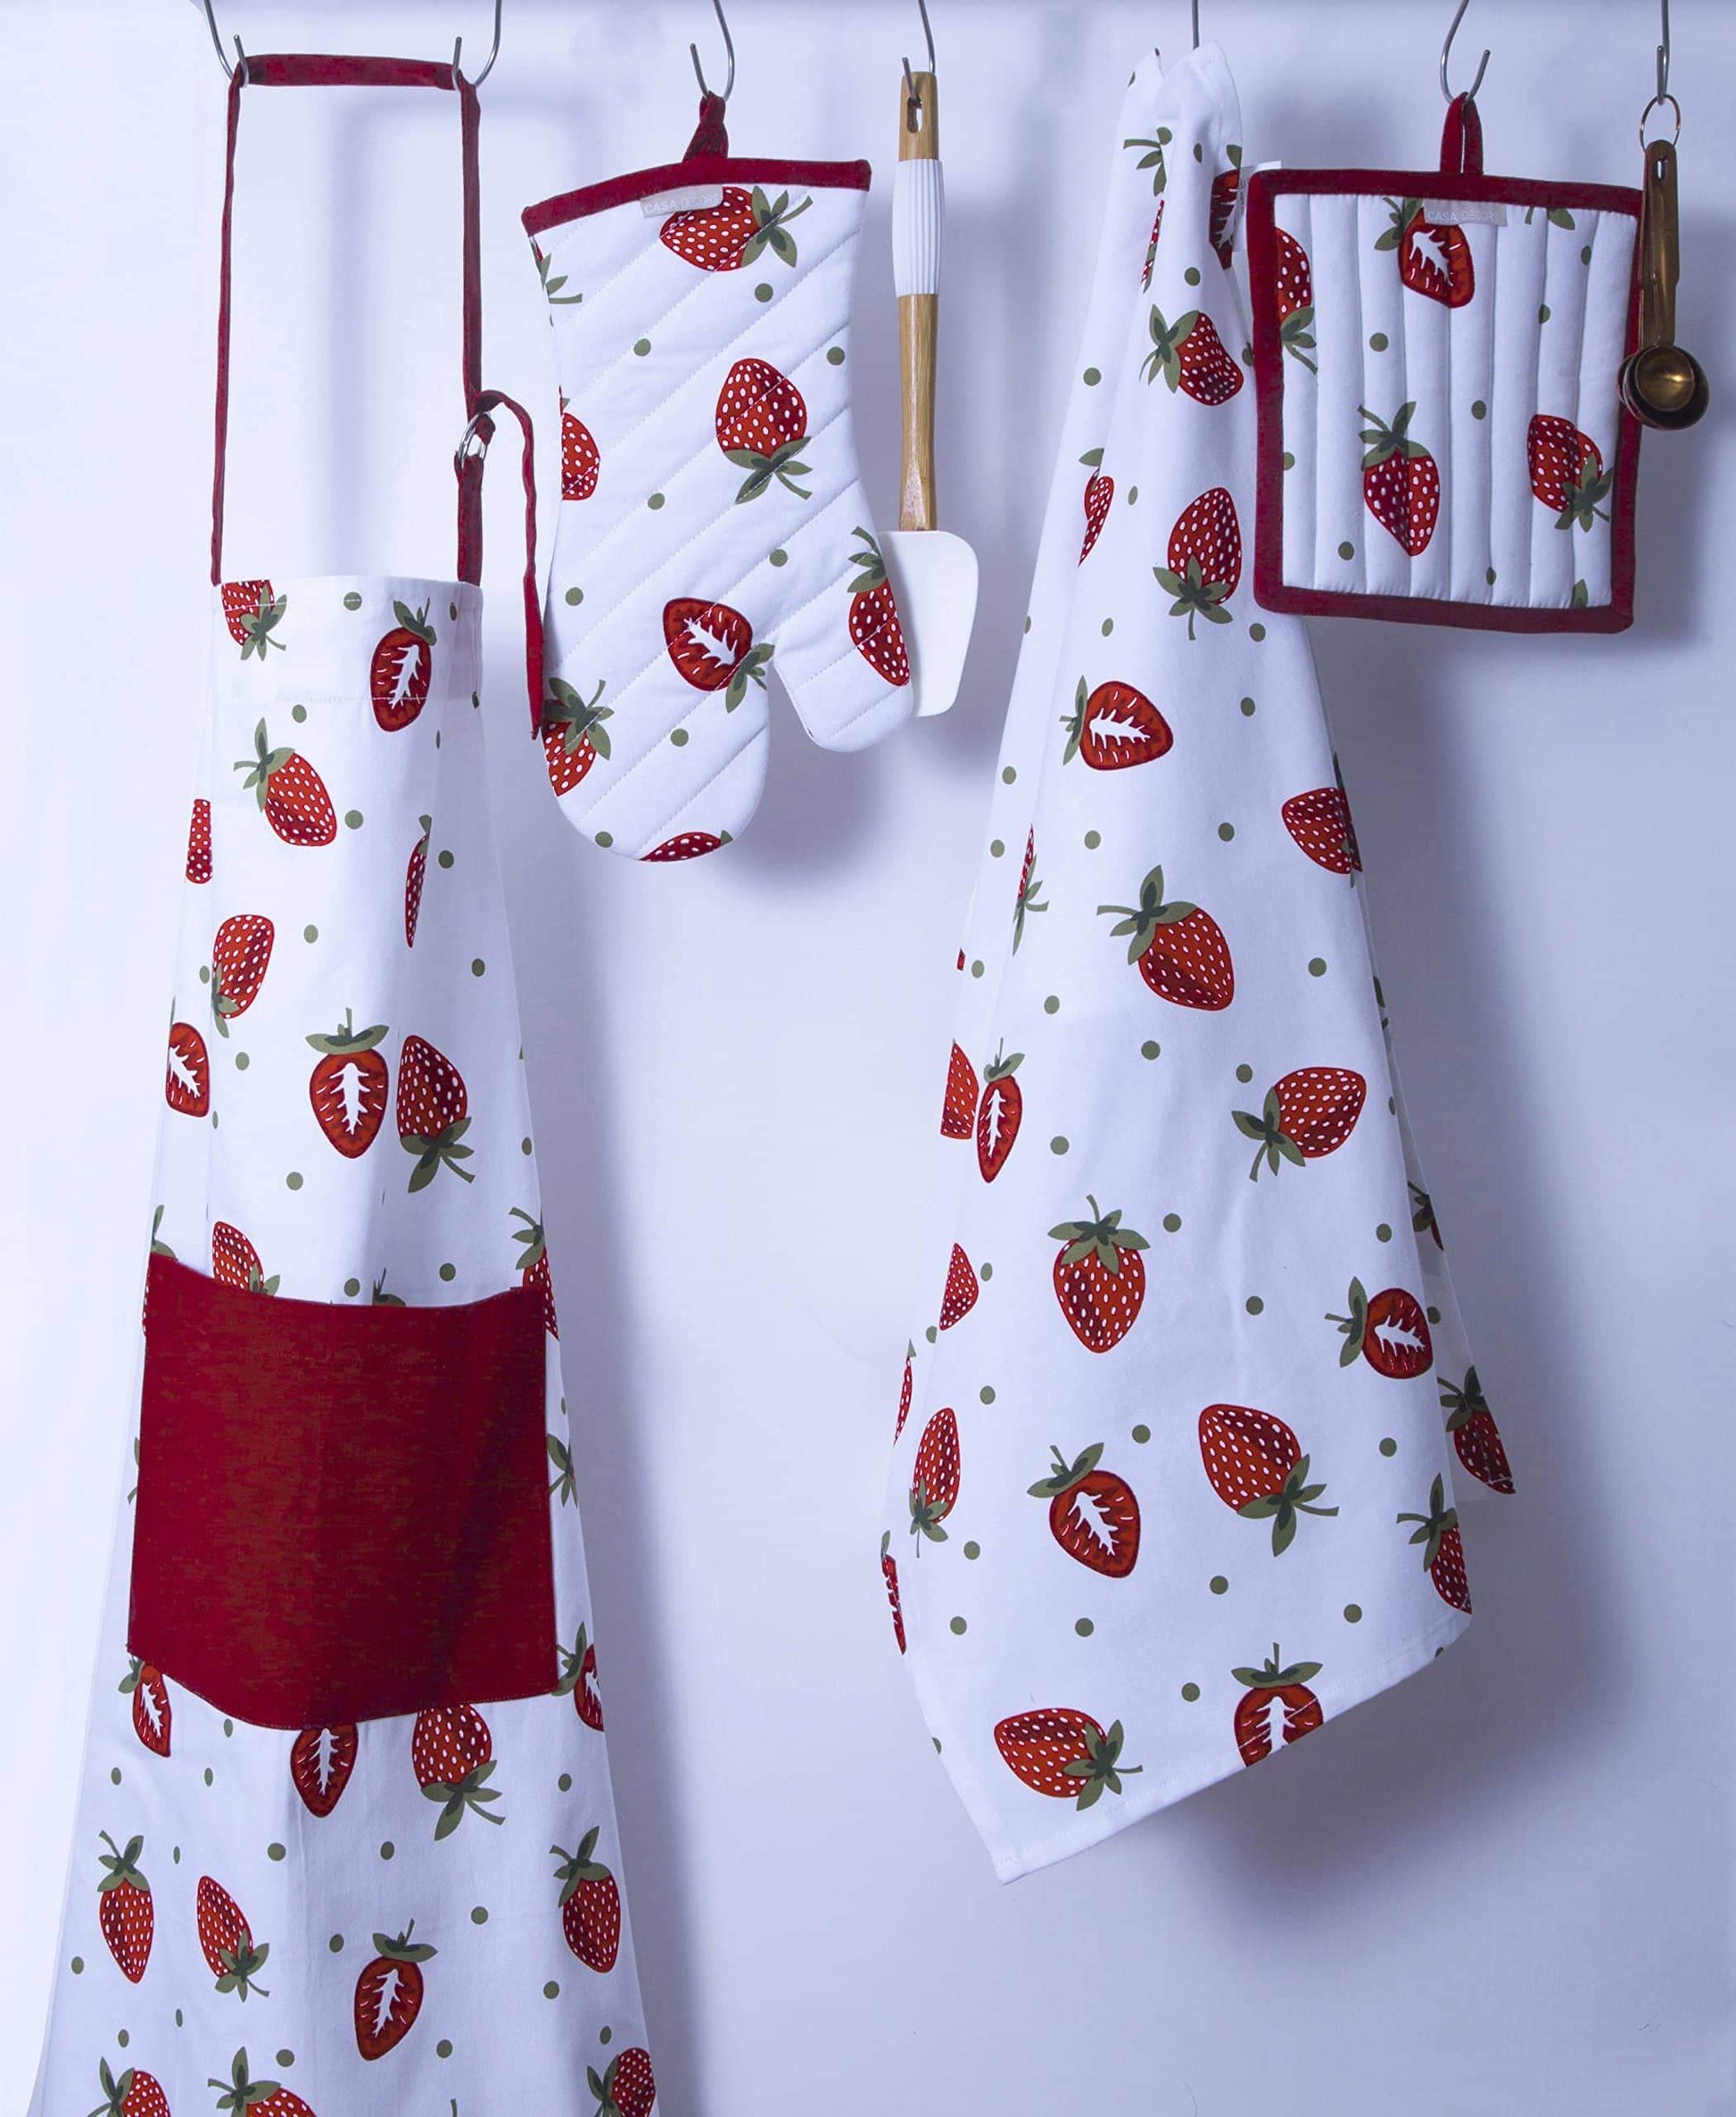 Purchase casa decors set of apron oven mitt pot holder pair of kitchen towels in a unique berry blast design made of 100 cotton eco friendly safe value pack and ideal gift set kitchen linen set